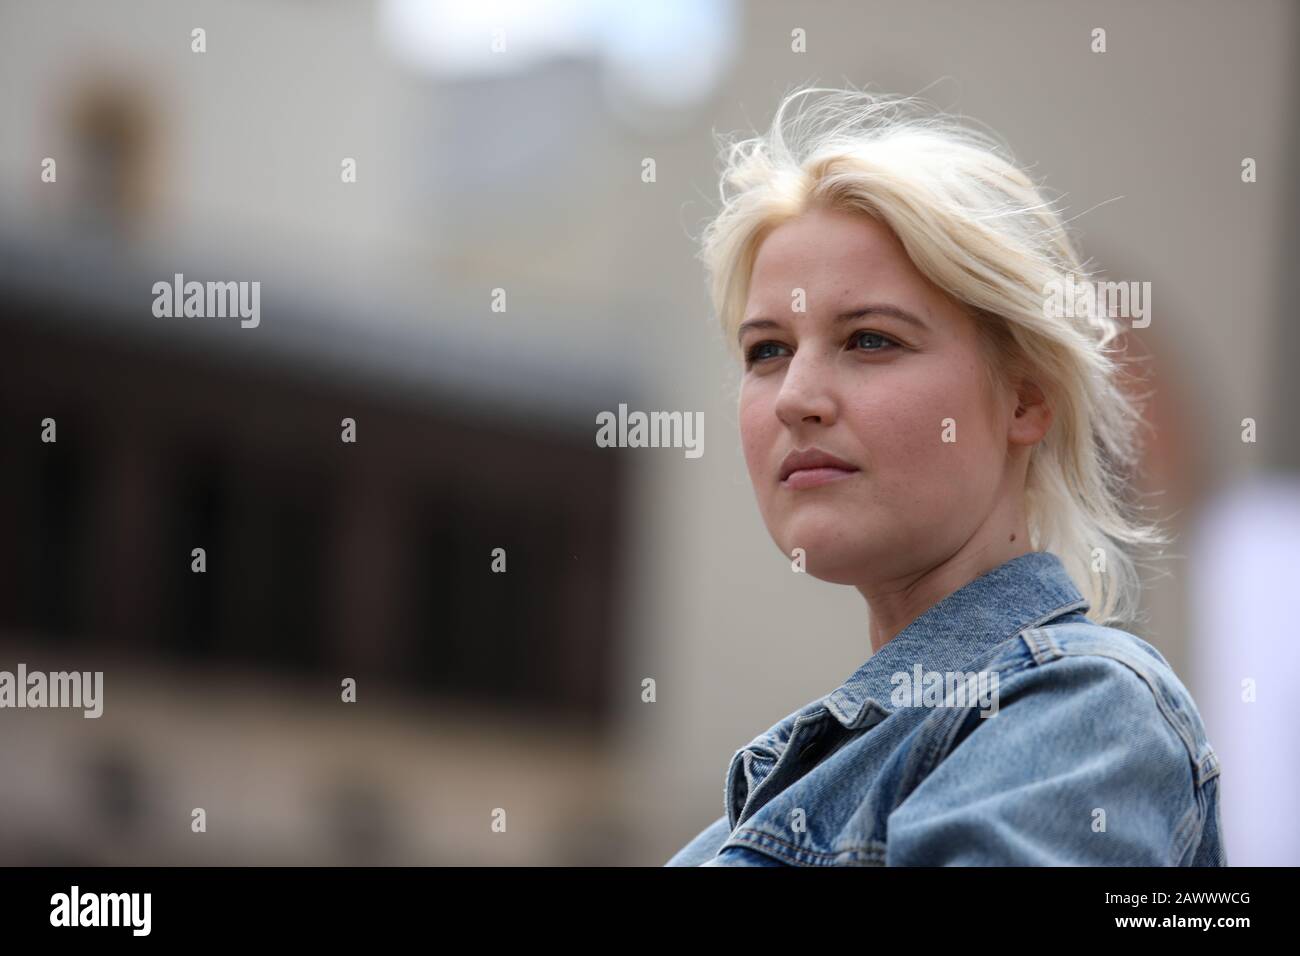 POLAND, KRAKOW - 29 April 2019: Aleksandra Domanska Polish film and television actress. Interview during OFF CAMERA 2019 festival in Cracow Stock Photo